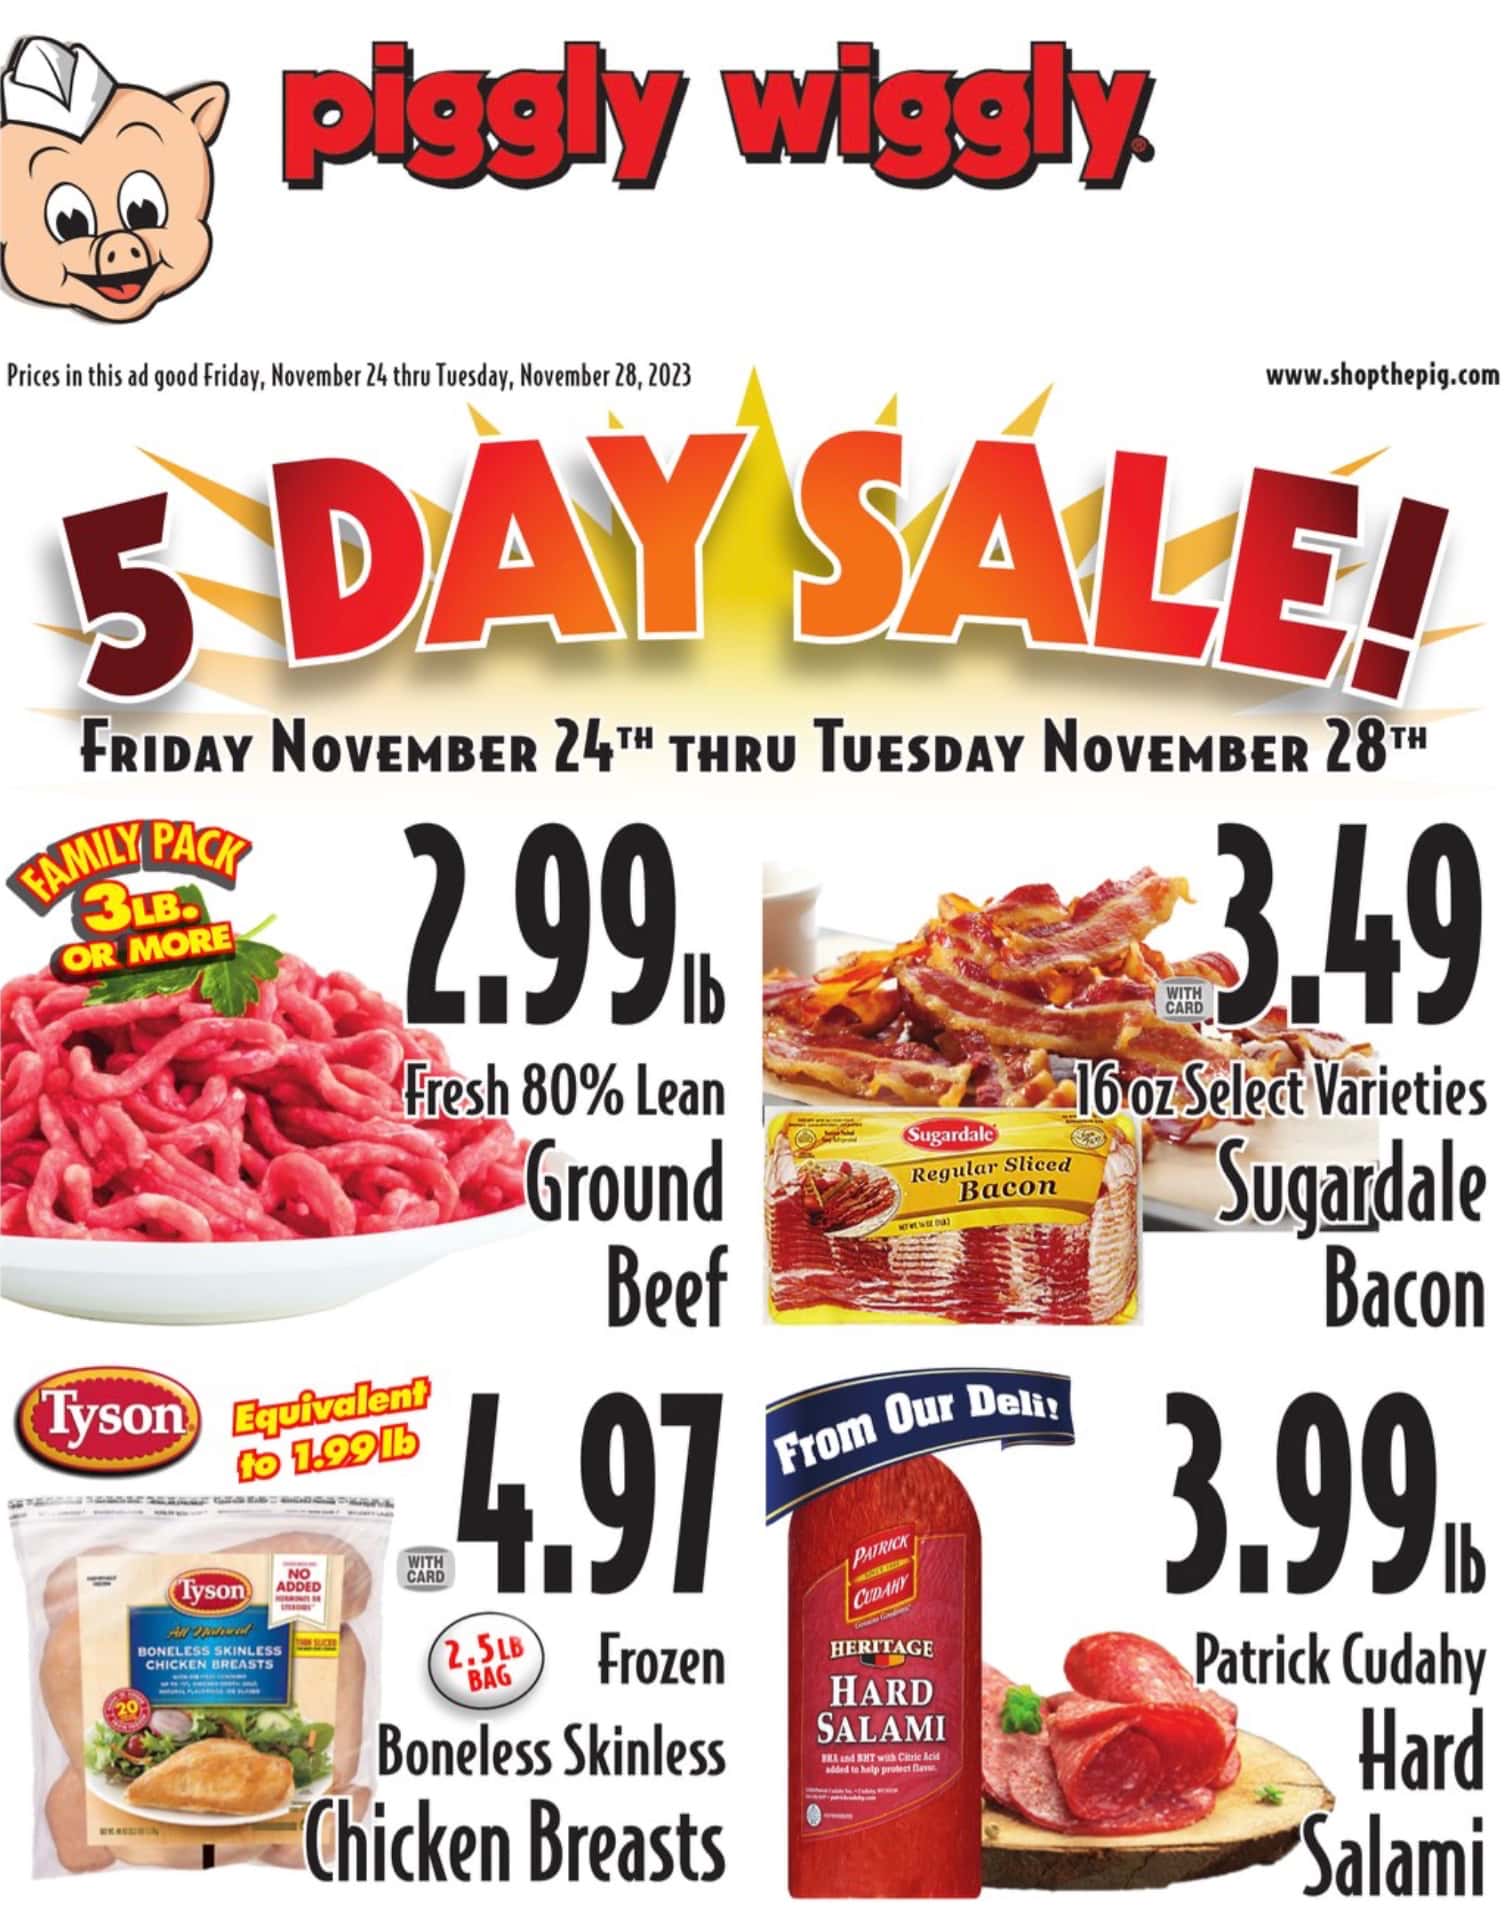 Piggly Wiggly Black Friday June 2024 Weekly Sales, Deals, Discounts and Digital Coupons.